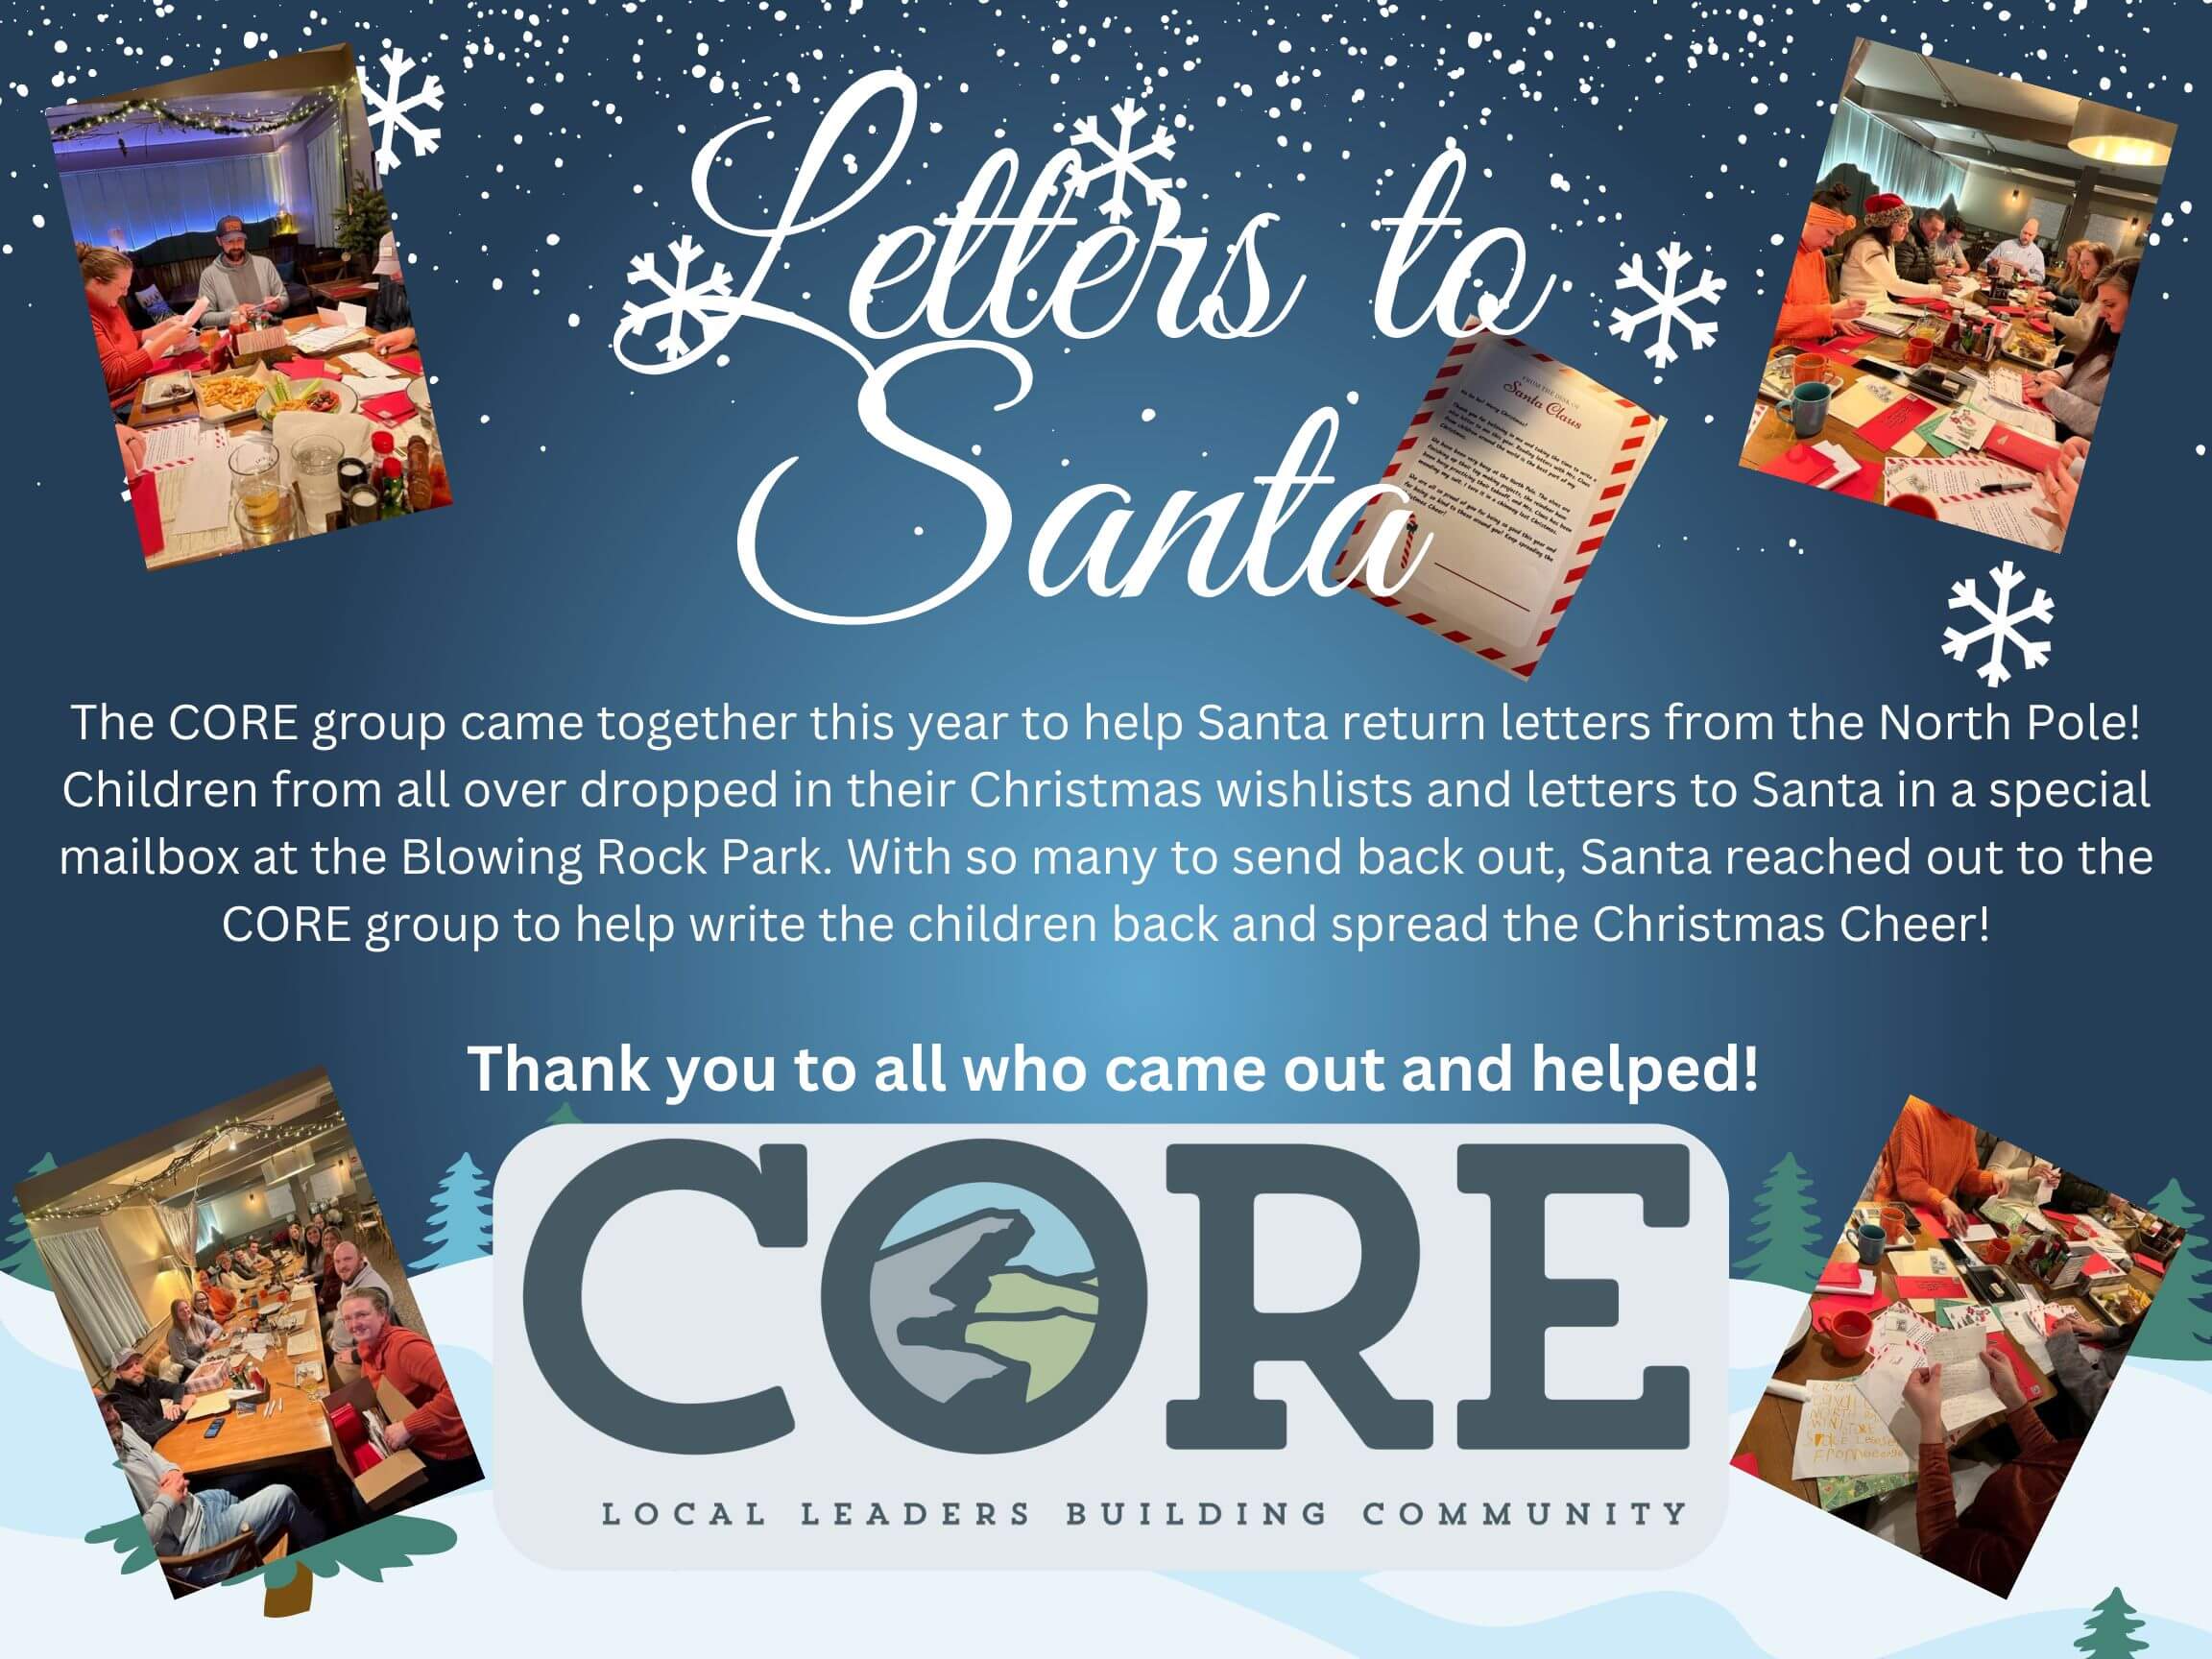 The CORE group returning Christmas letters